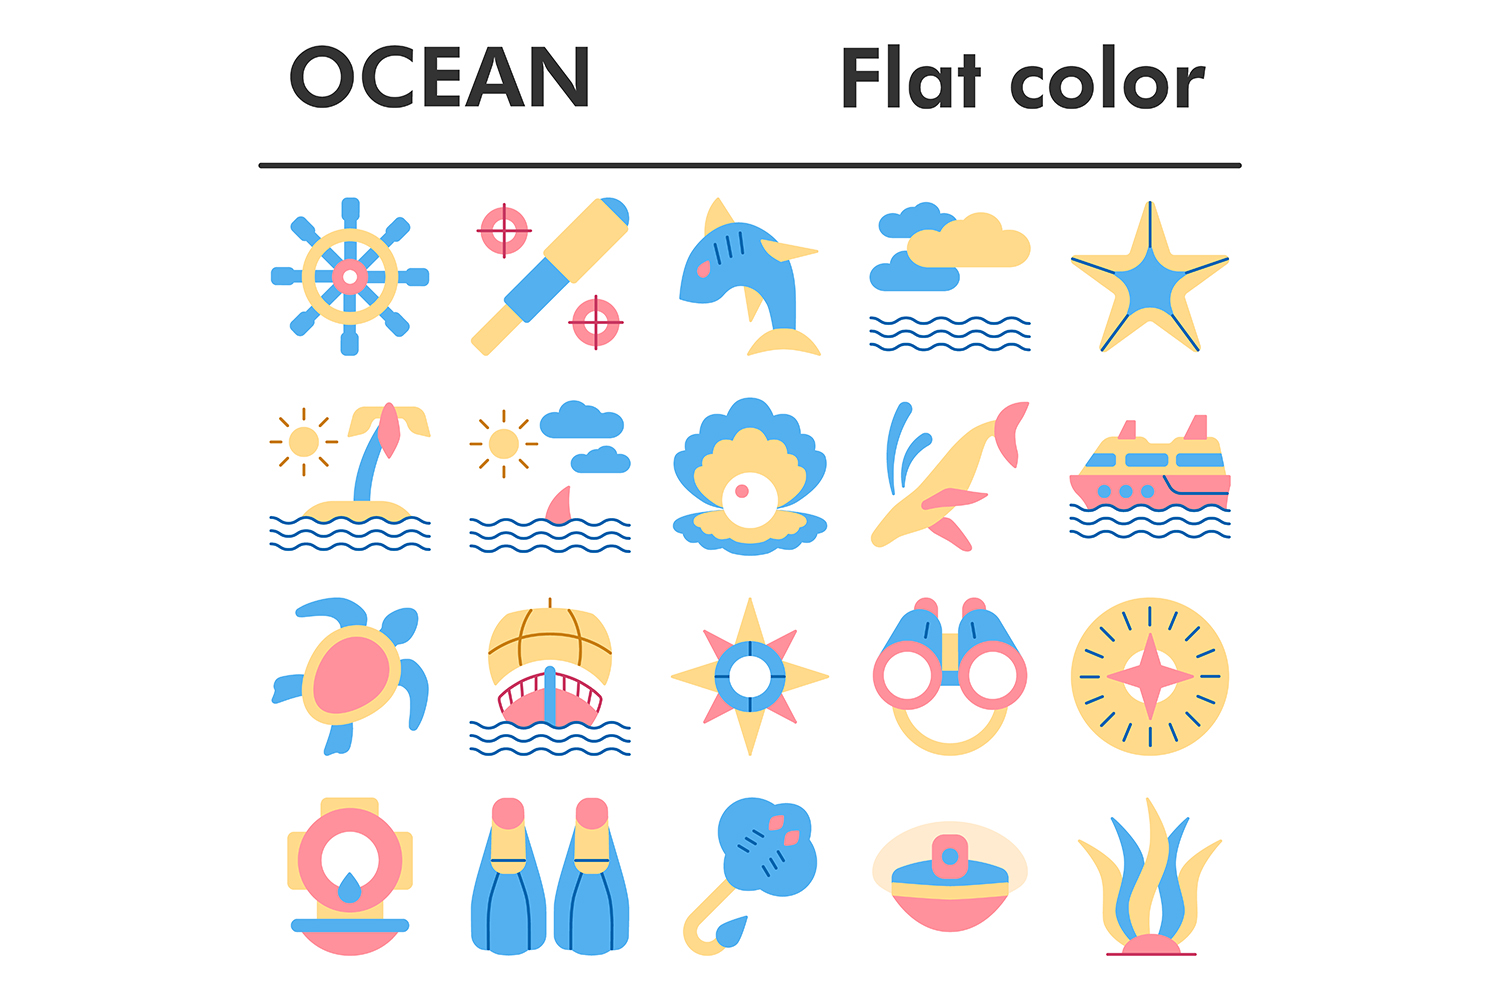 Ocean icons set, flat color style pinterest preview image.